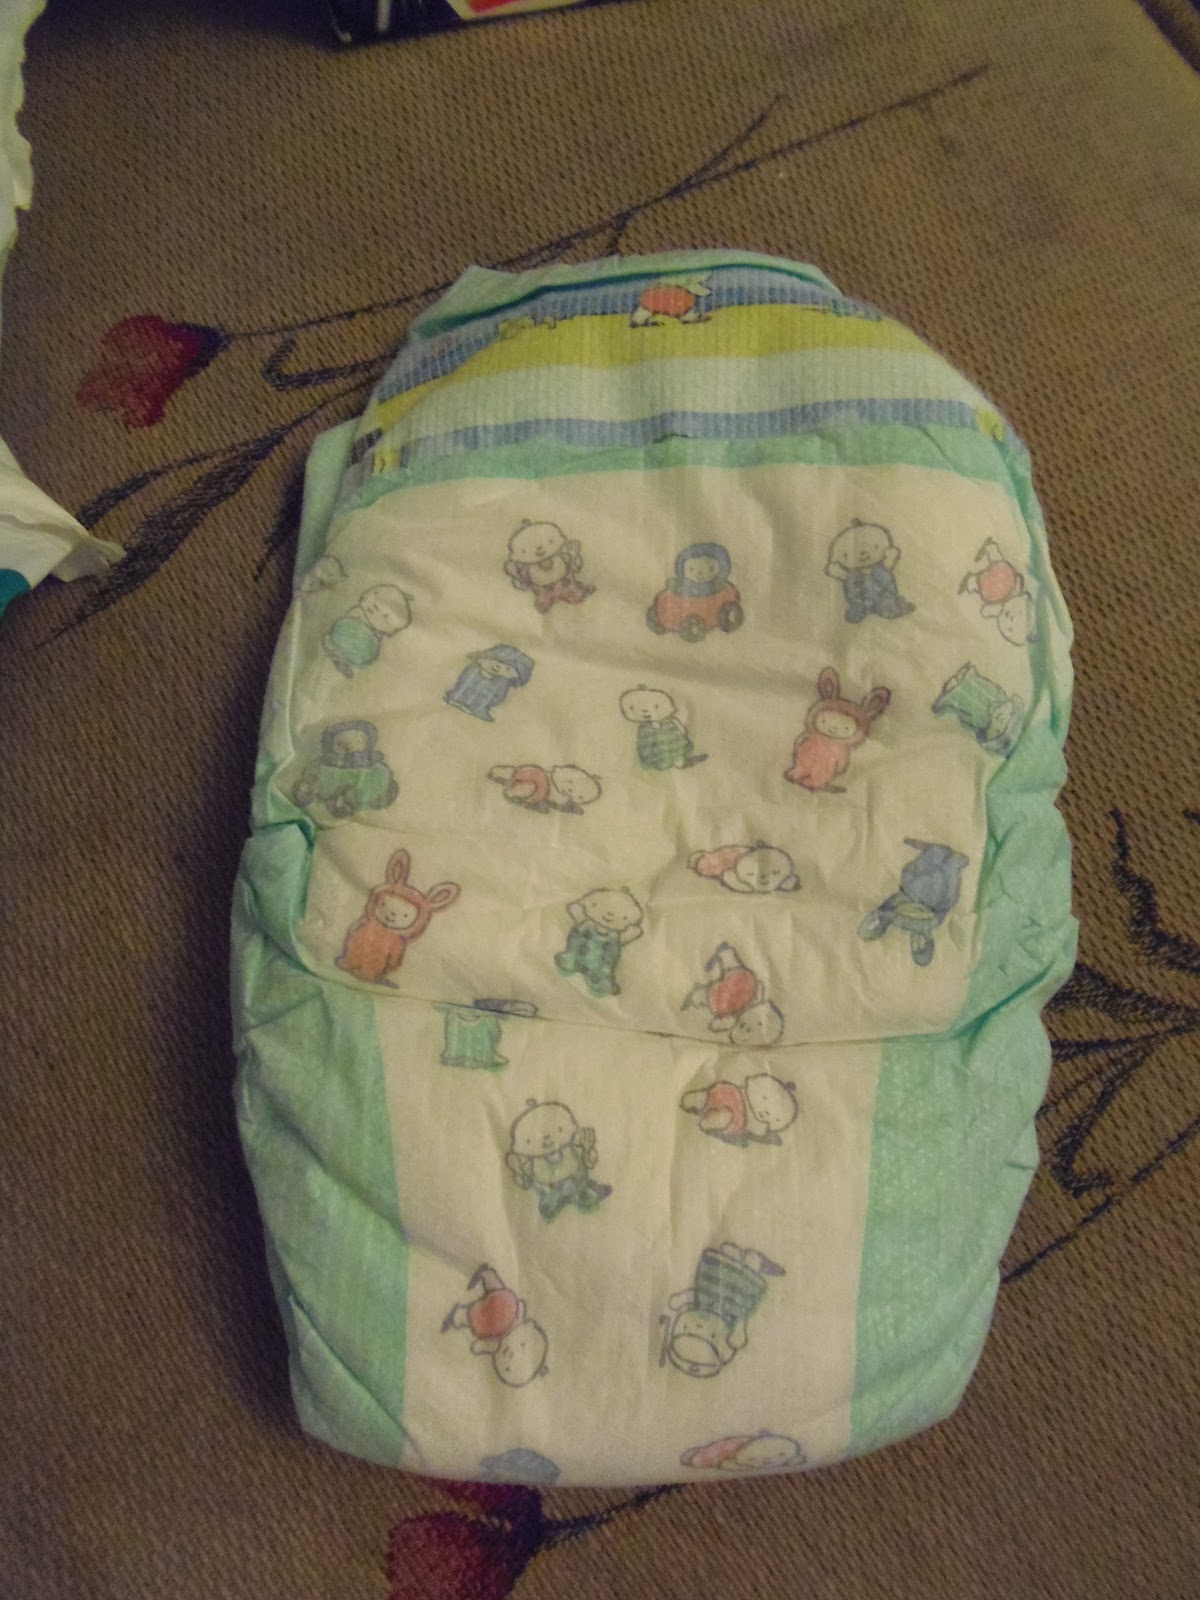 Reviews 4 Moms!: Asda's Little Angels Comfort Nappies